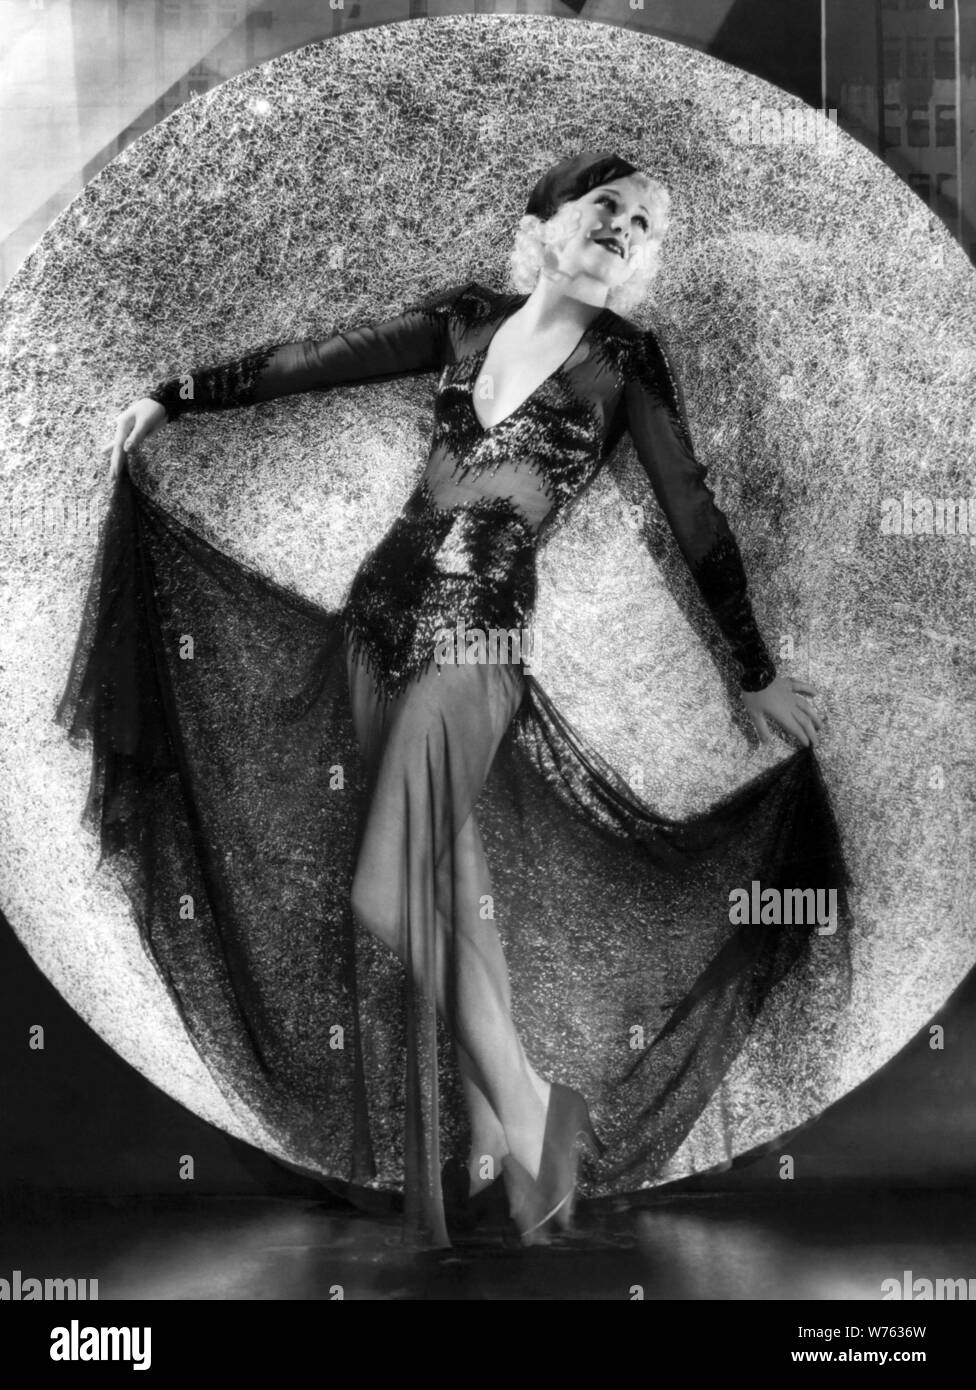 GINGER ROGERS in GOLD DIGGERS OF 1933 (1933), directed by MERVYN LEROY. Credit: WARNER BROTHERS / Album Stock Photo